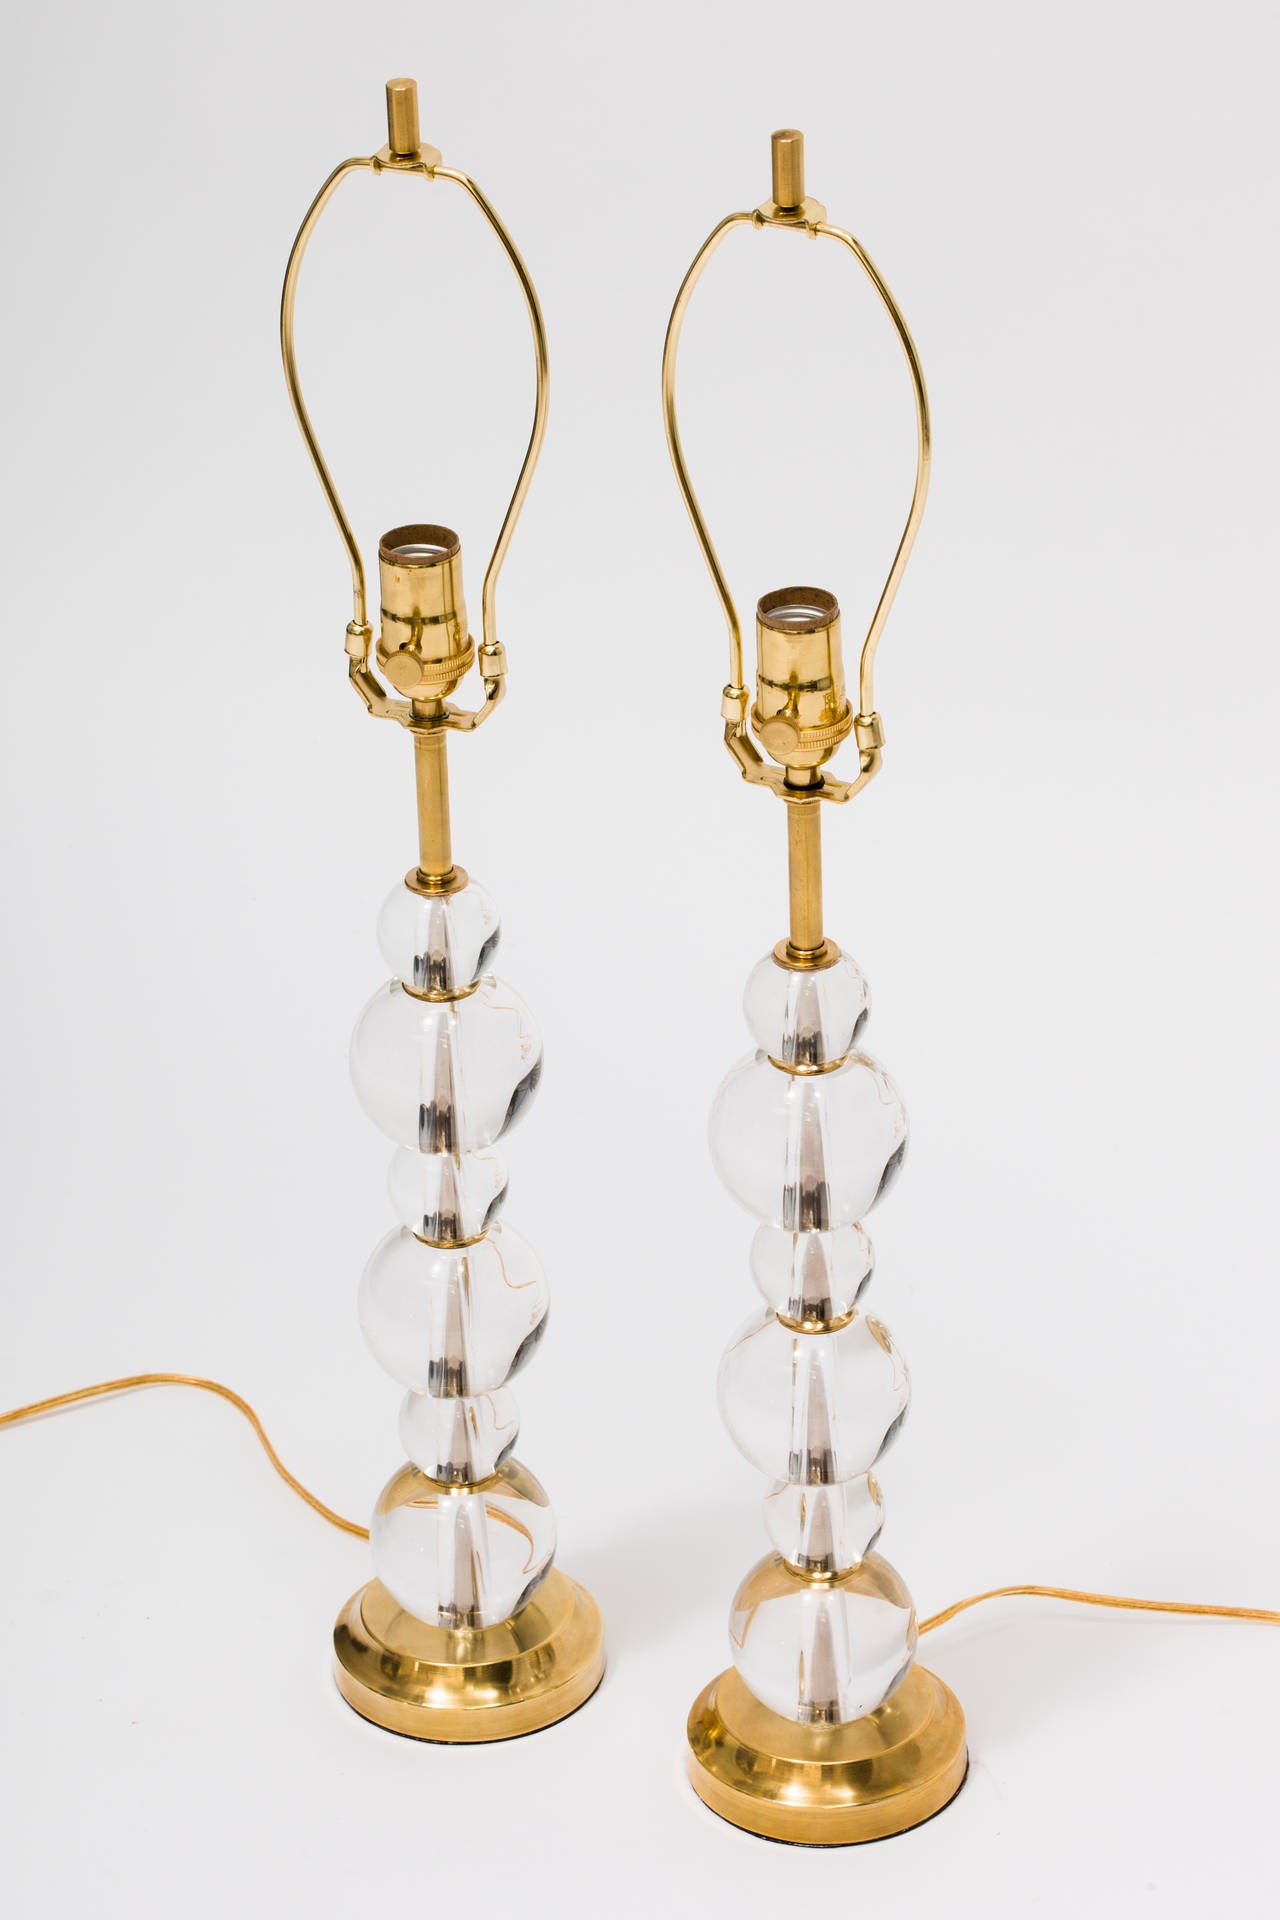 Pair of solid glass balls lamps.
New wiring.
Solid brass hardware.